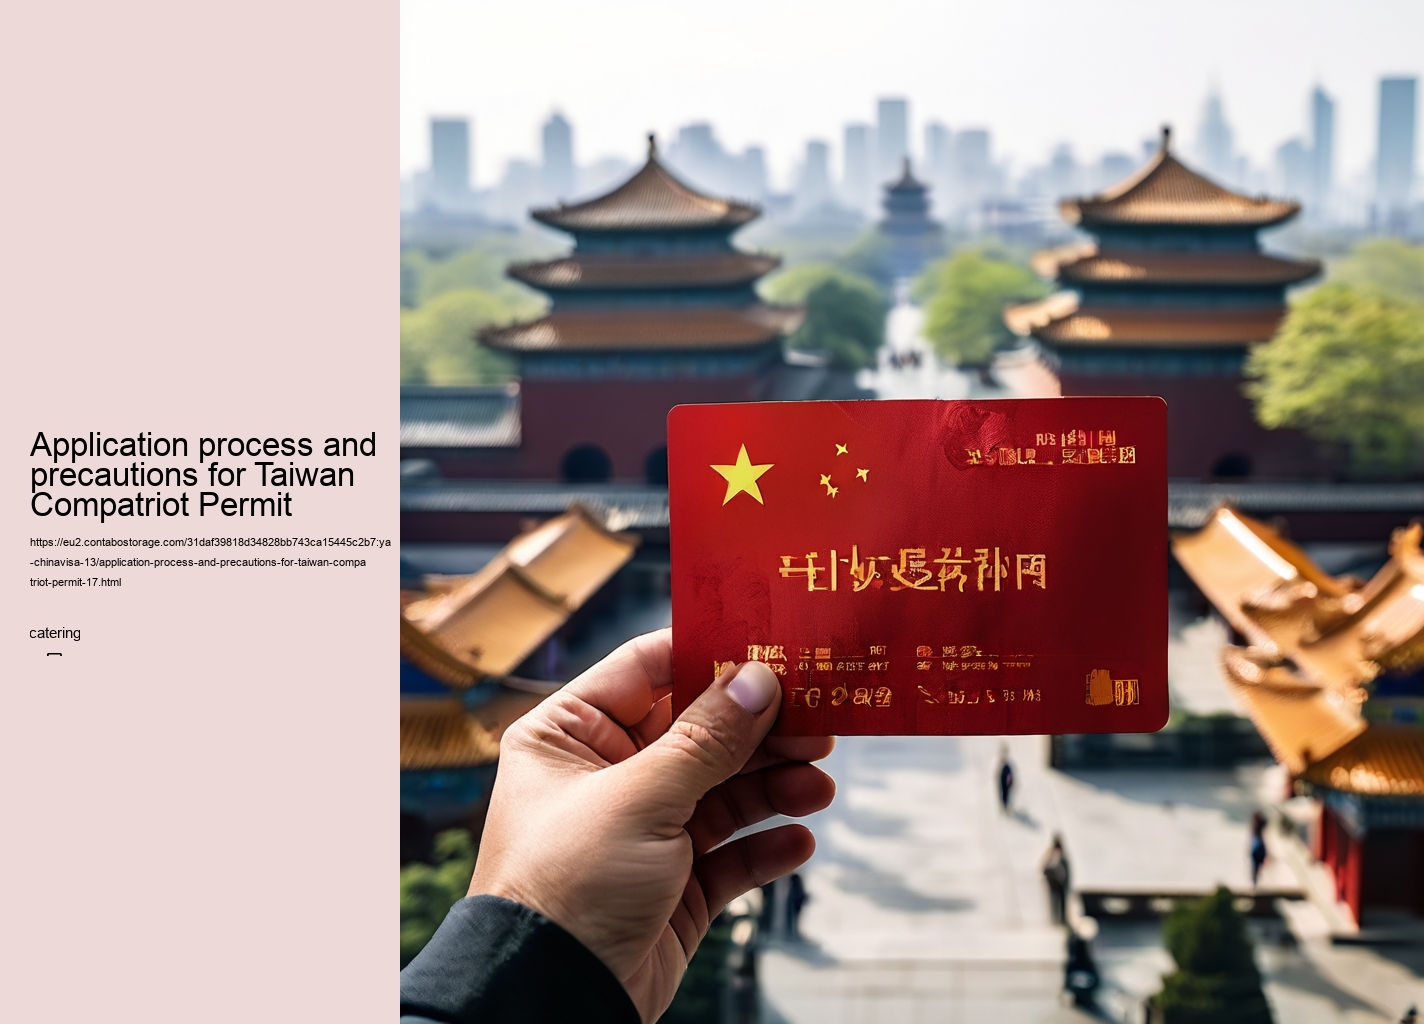 Application process and precautions for Taiwan Compatriot Permit